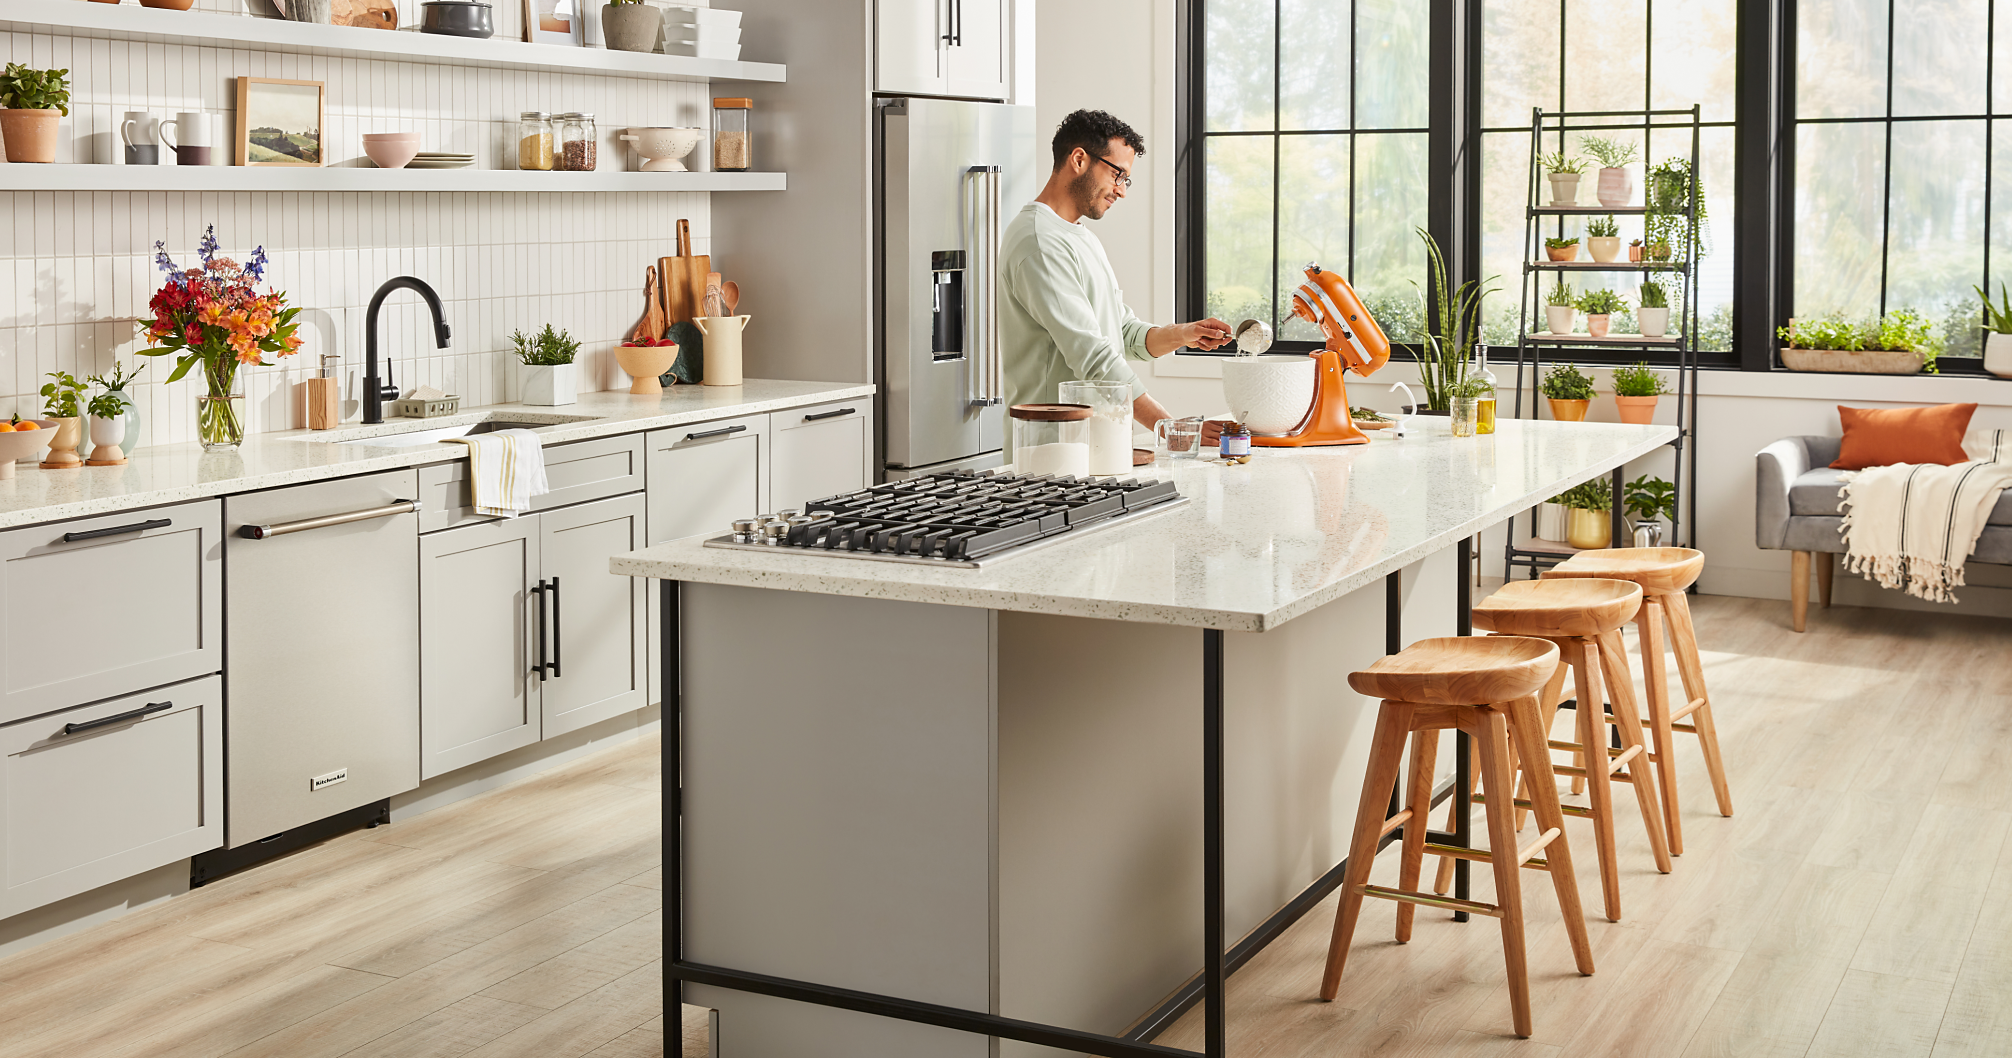 A man using a Honey KitchenAid® Stand Mixer on the island in a bright kitchen.